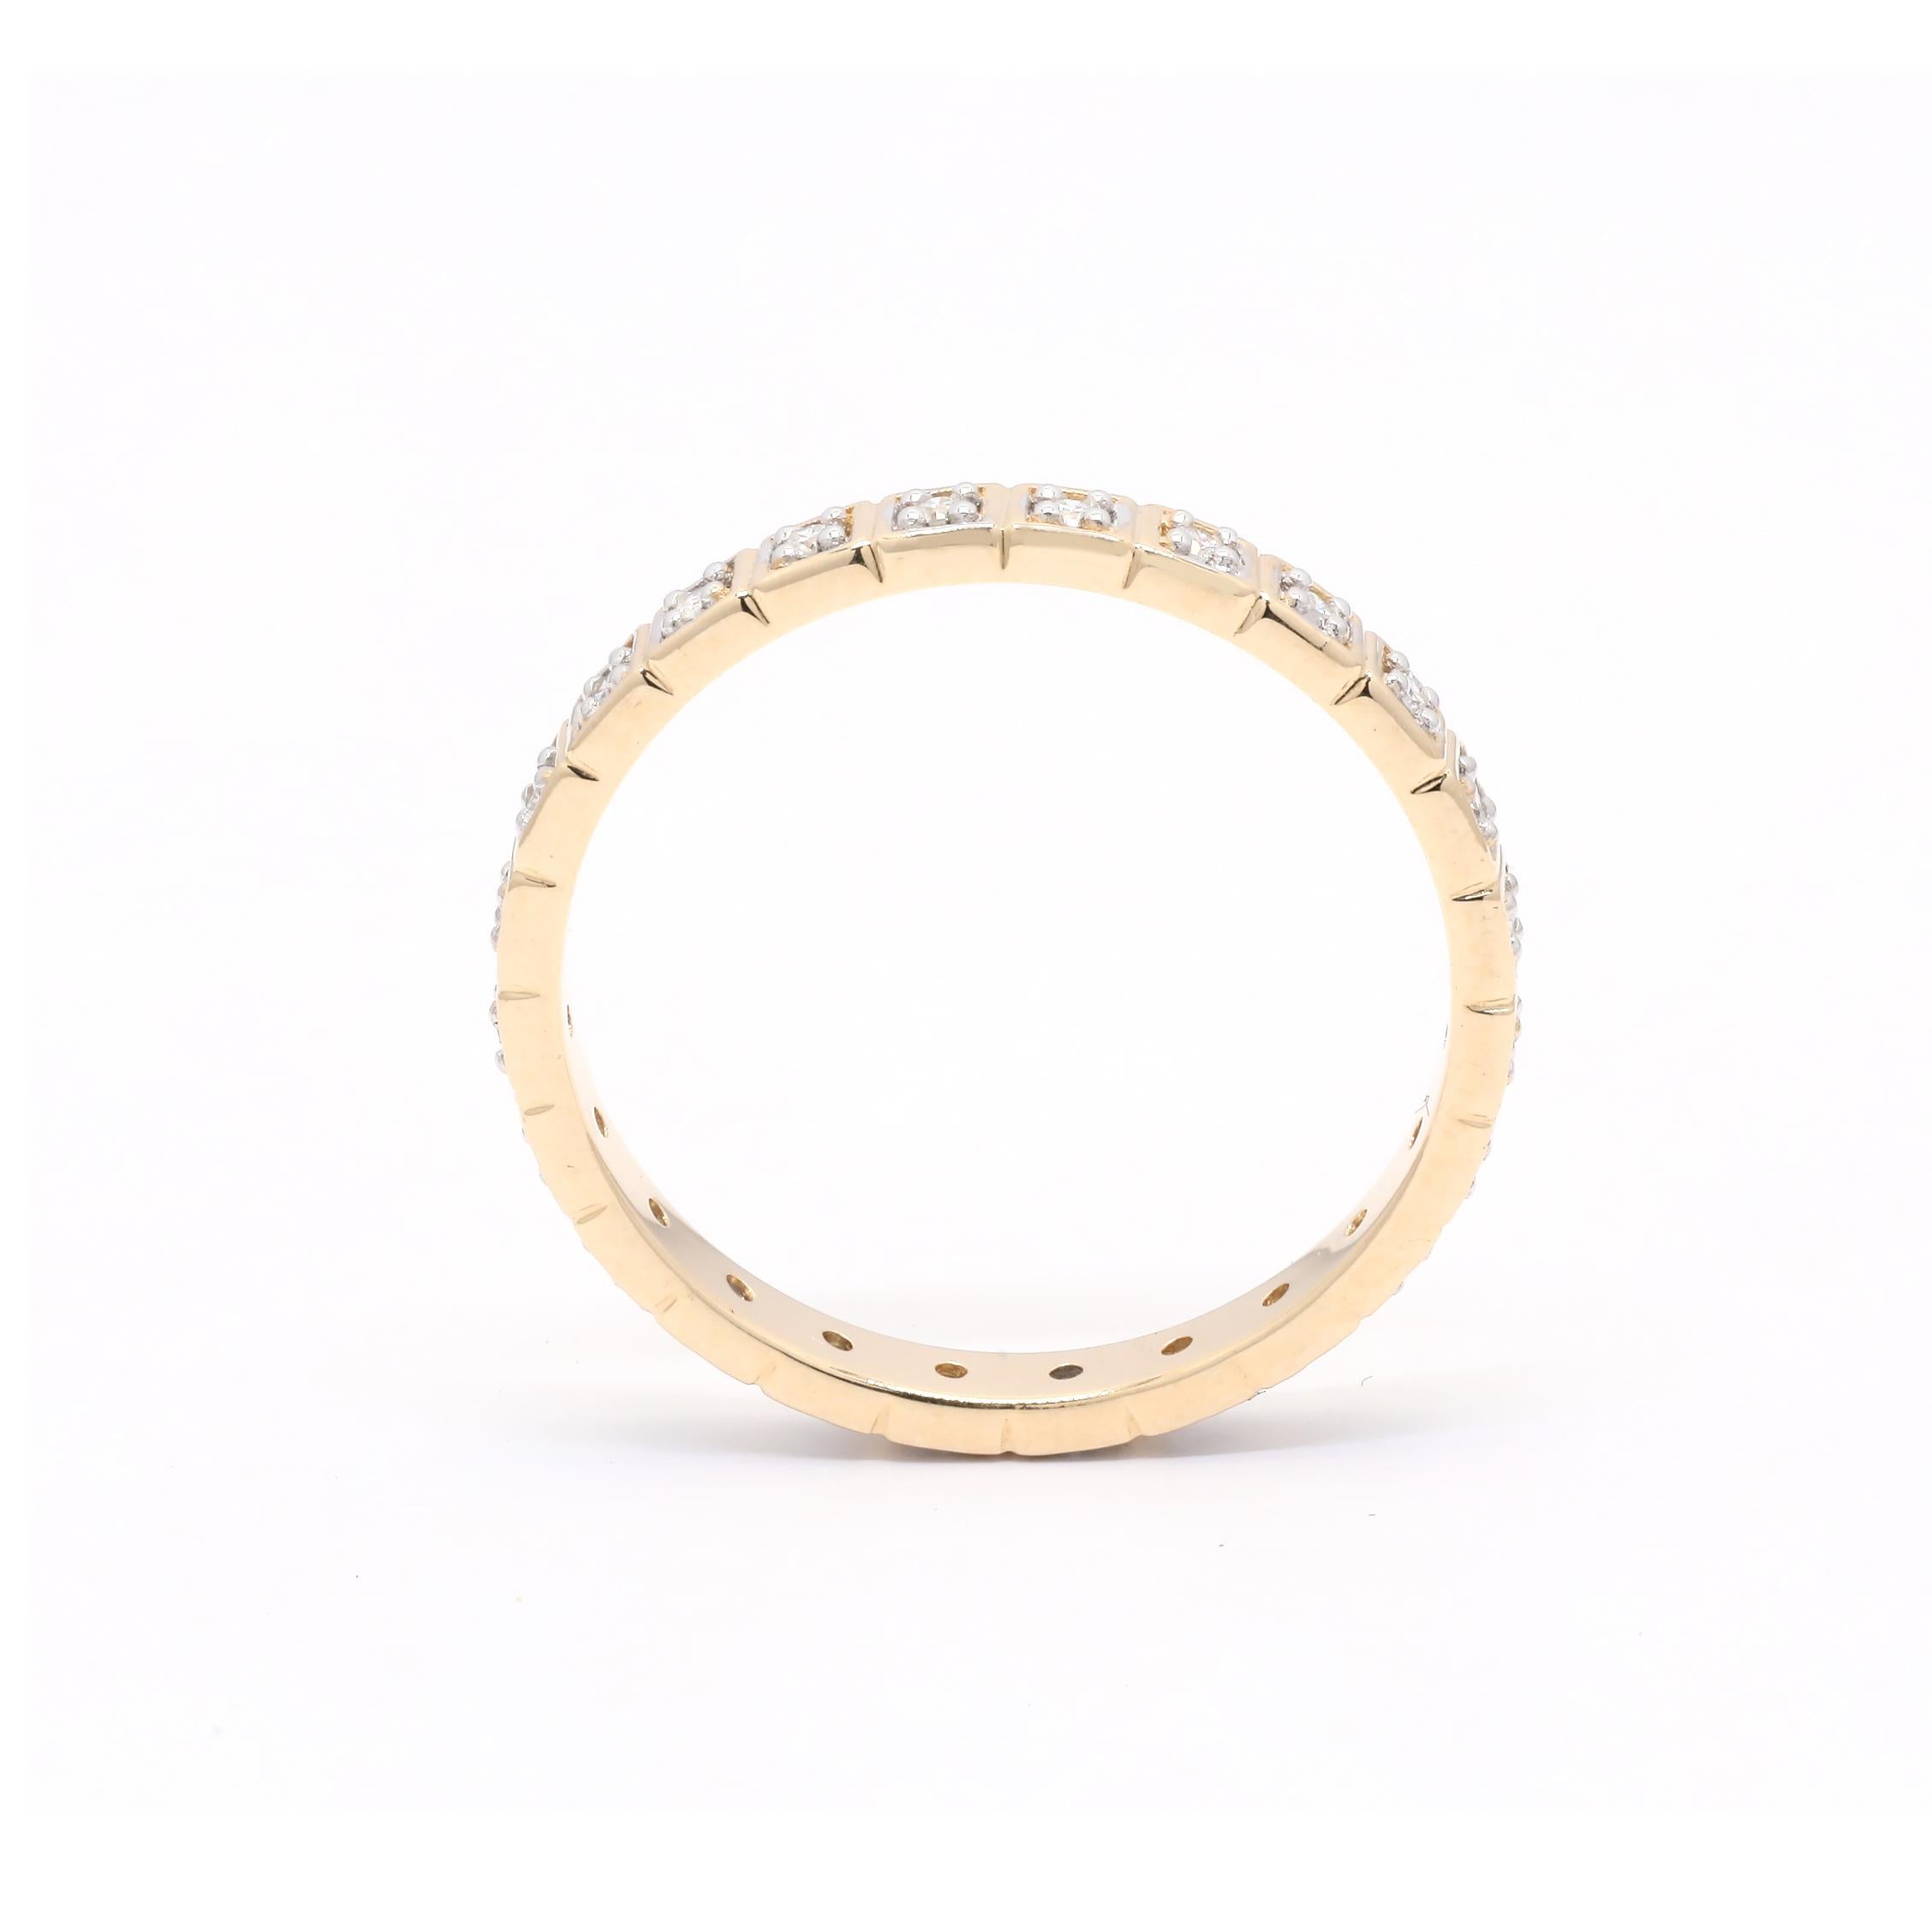 For Sale:  Unisex Diamond Eternity Band Ring in 14K Yellow Gold 3